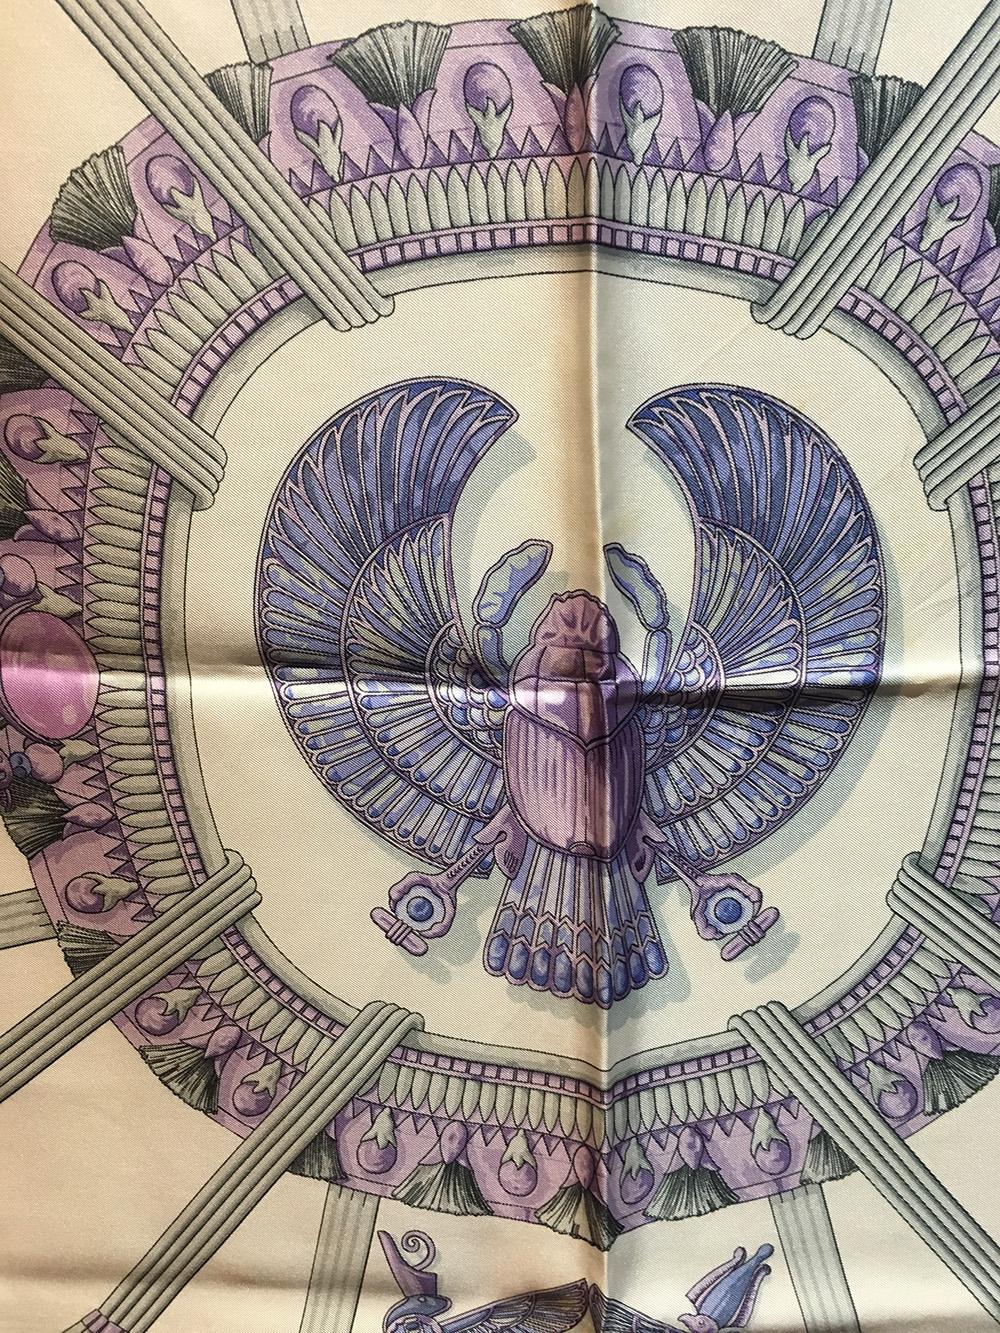 Vintage Hermes Egypte Silk Scarf c1970s in very good condition. Original silk screen design c1970 by Caty Latham features a centered scarab design in shades of purple surrounded by purple and grey Egyptian gems, trims, tassels, and animals with more